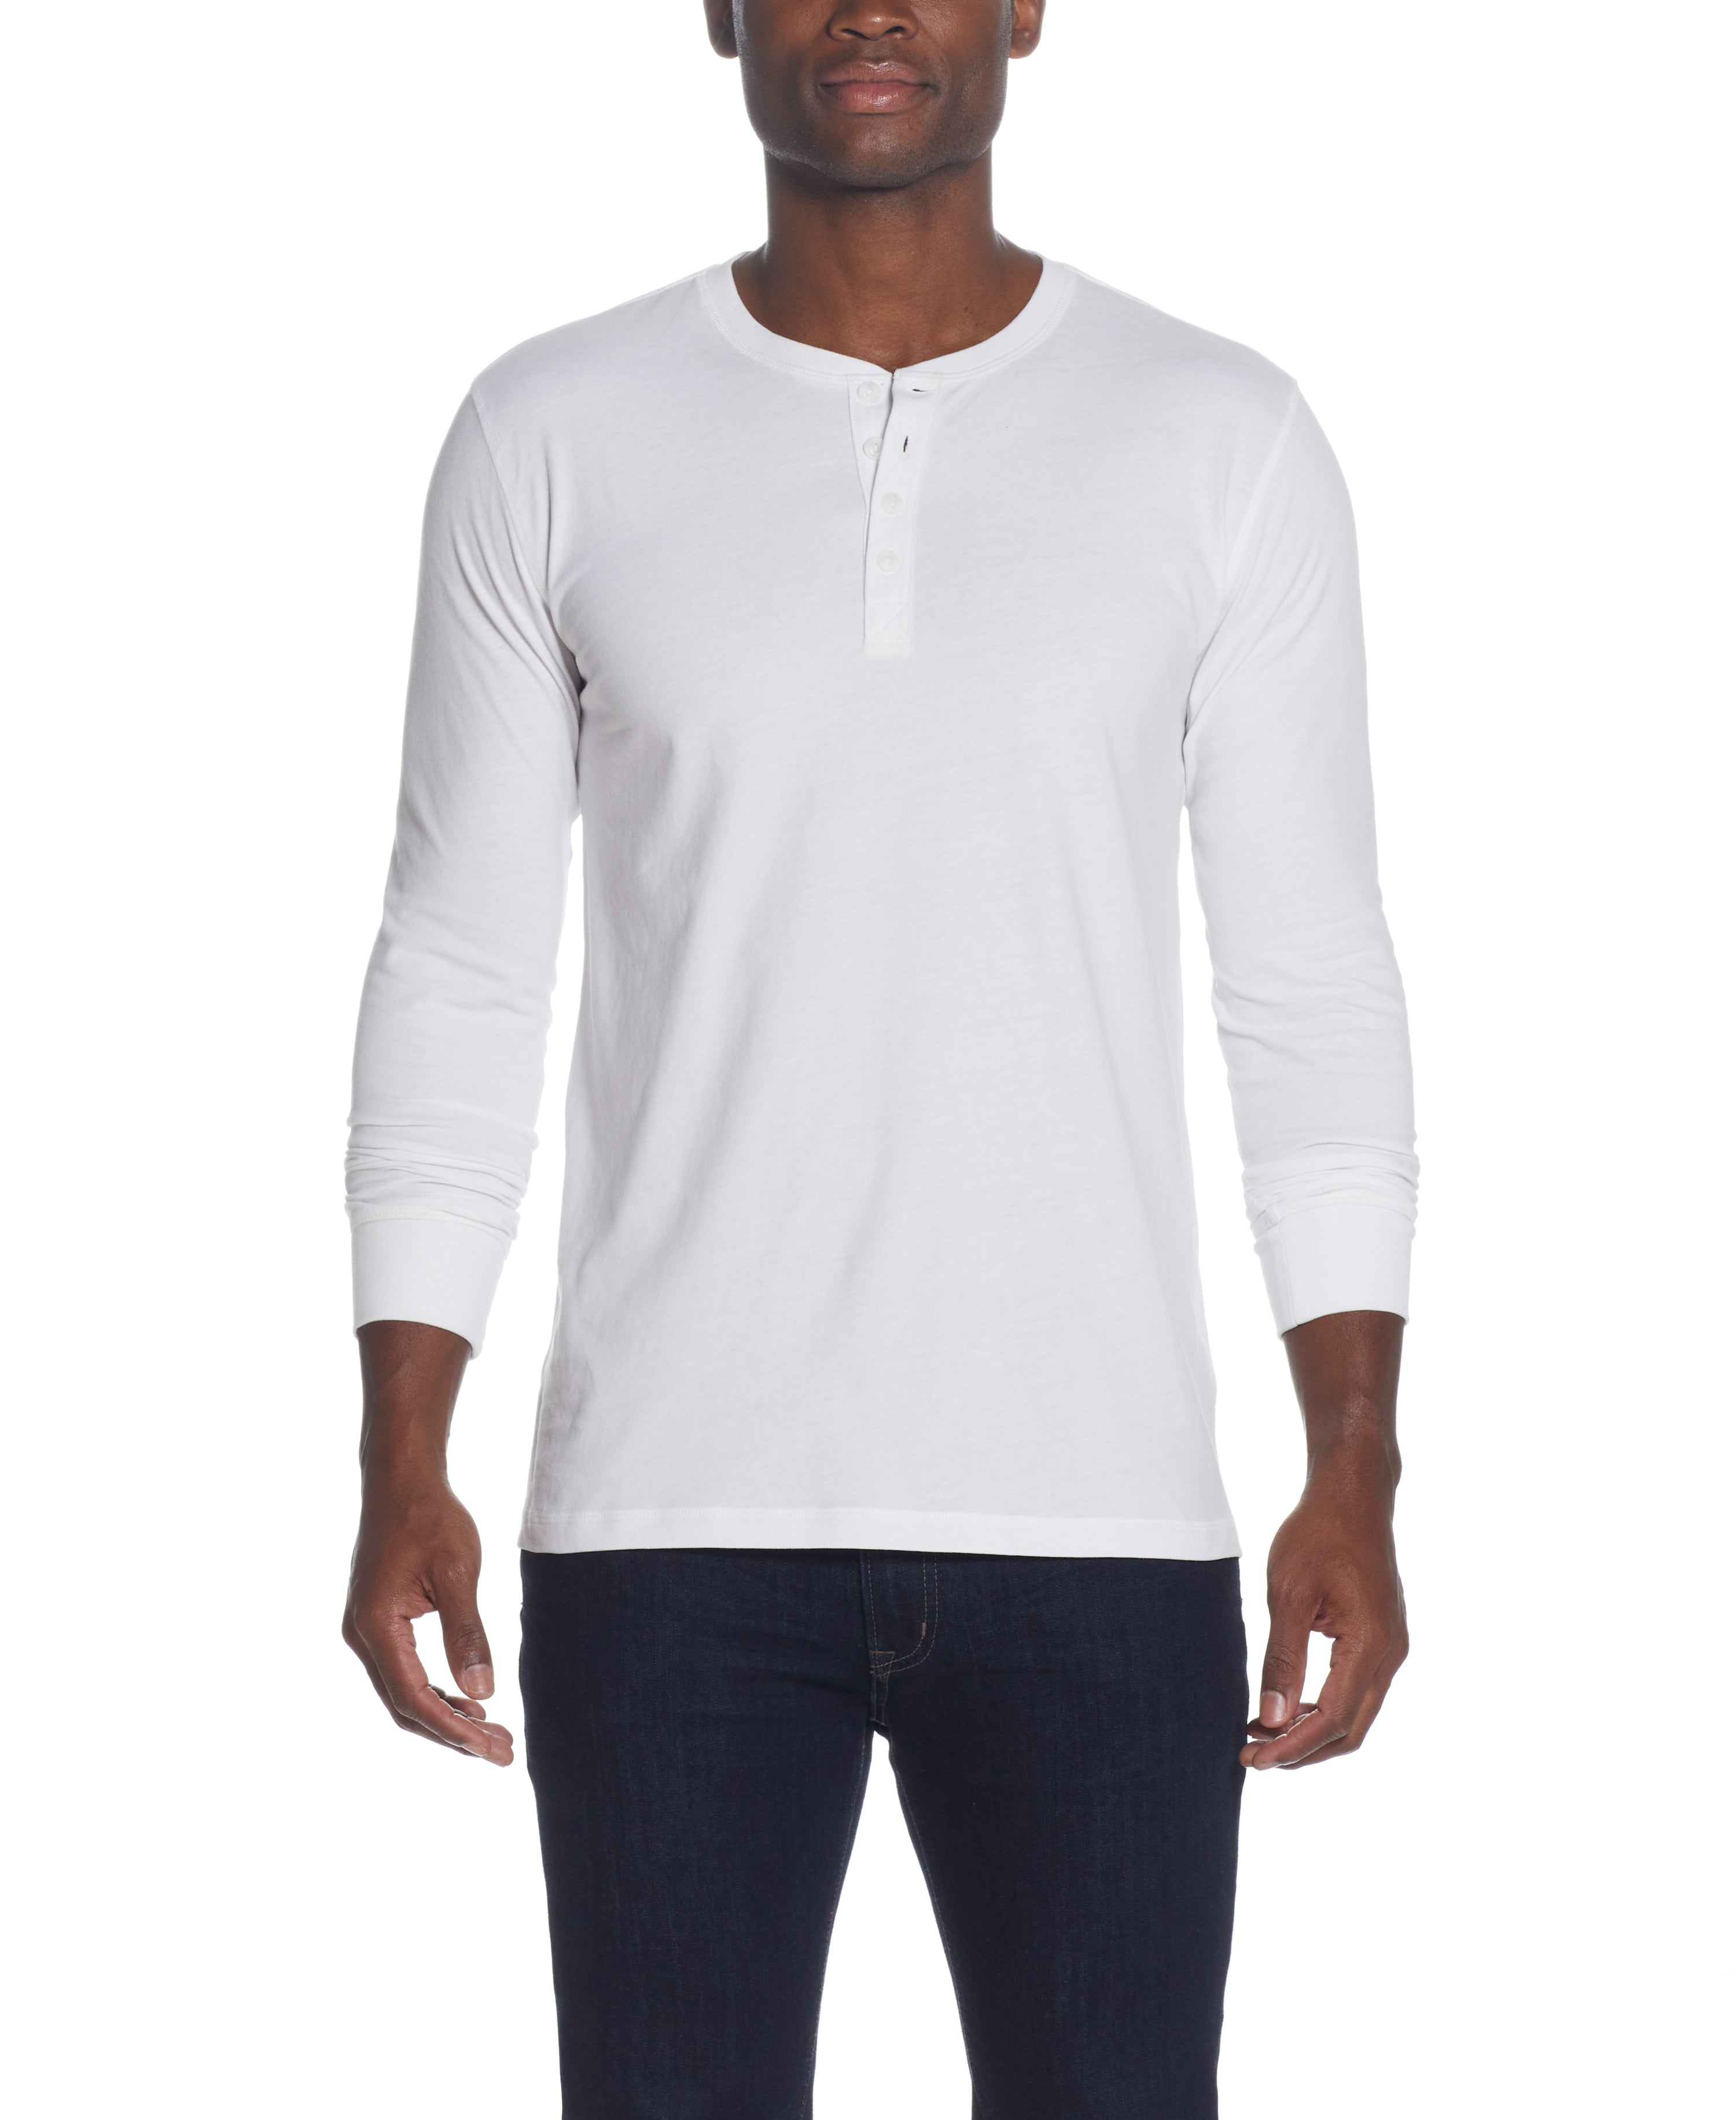 L/S BRUSHED JERSEY HENLEY in WHITE